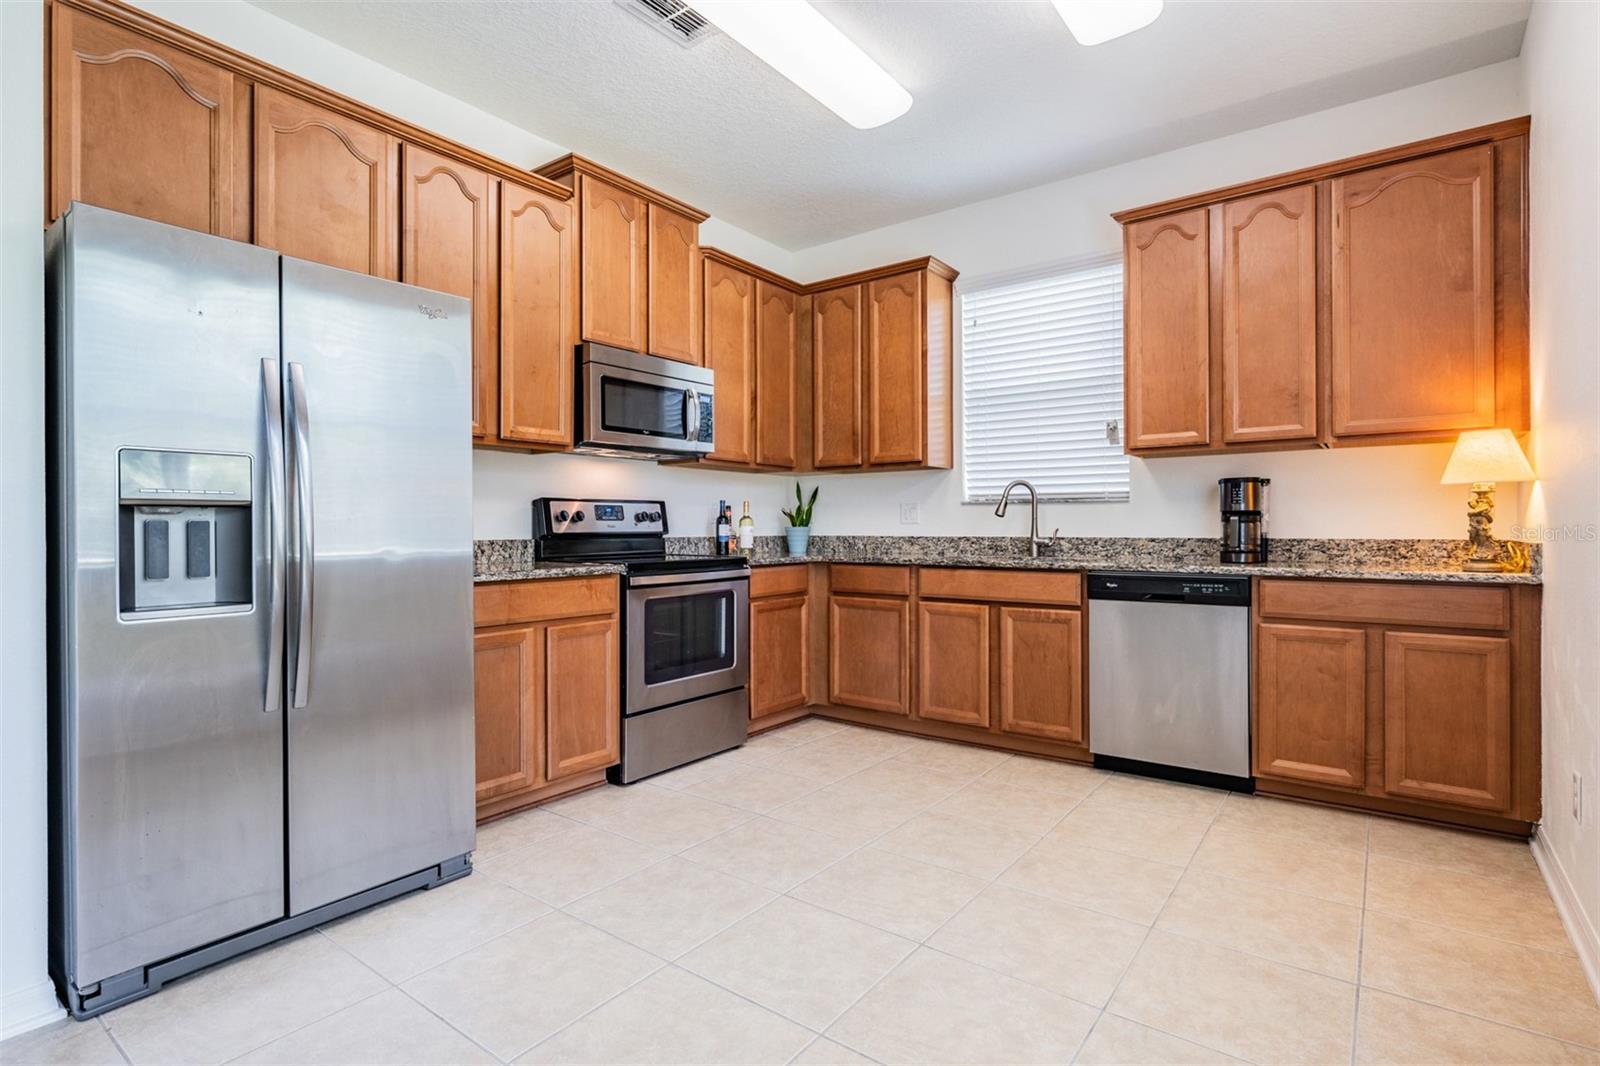 Wood Cabinets, Granite counters & Stainless steel appliances